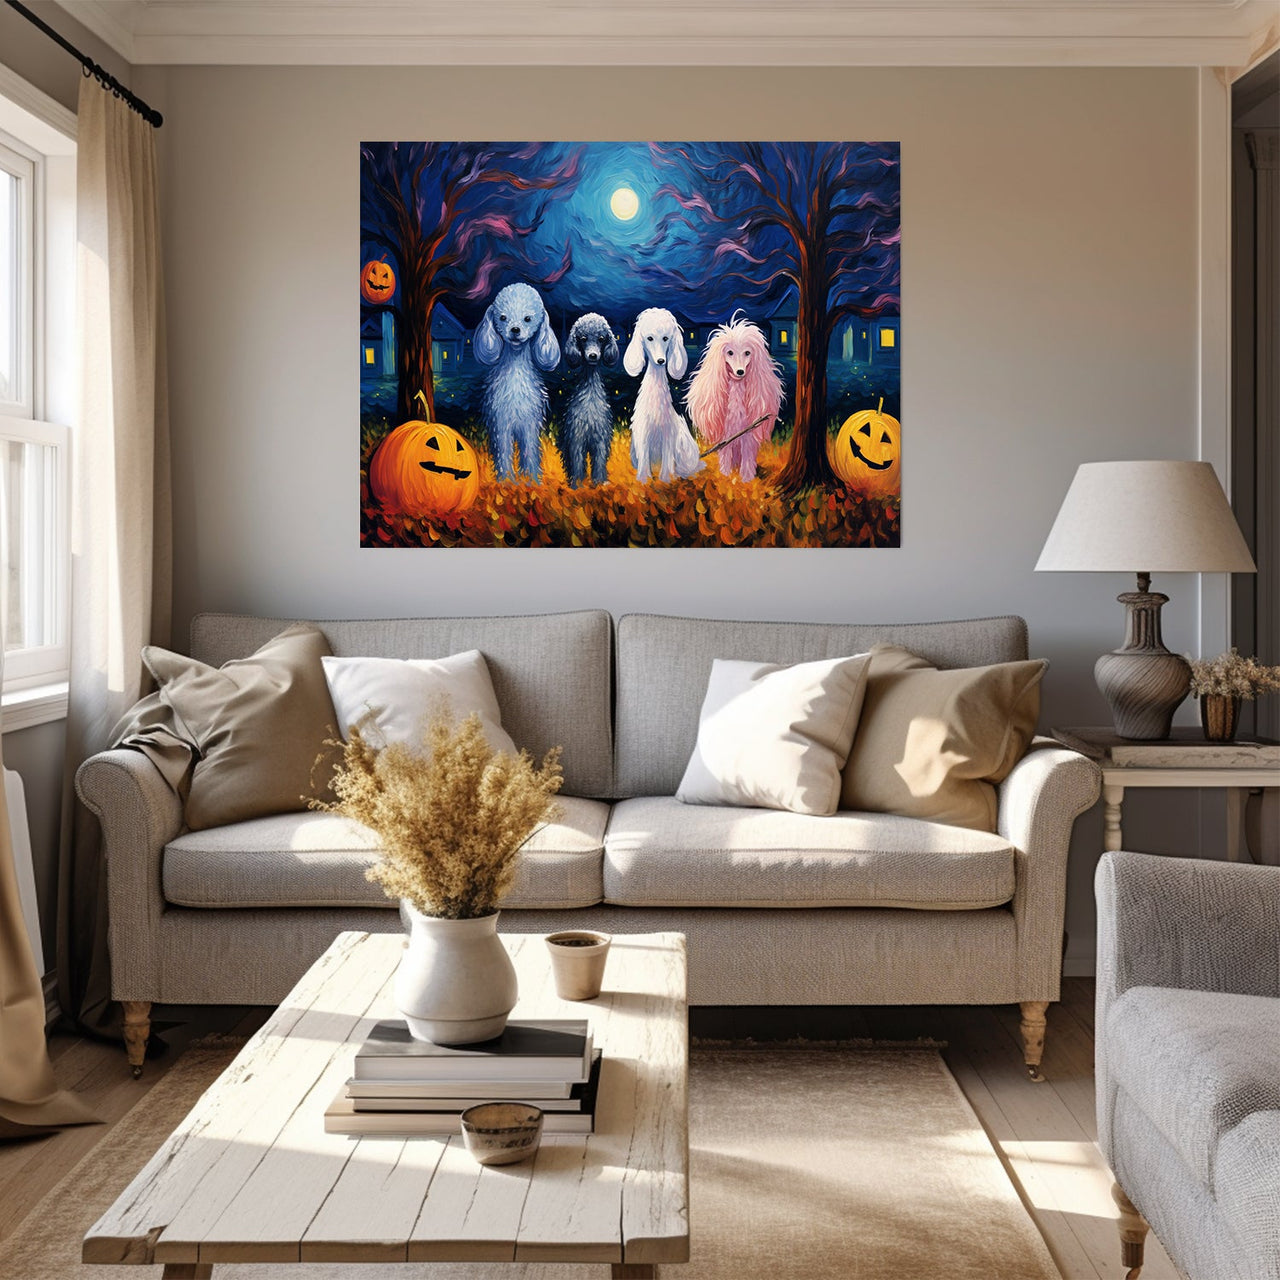 Poodle Dog Halloween With Pumpkin Oil Painting Van Goh Style, Wooden Canvas Prints Wall Art Painting , Canvas 3d Art